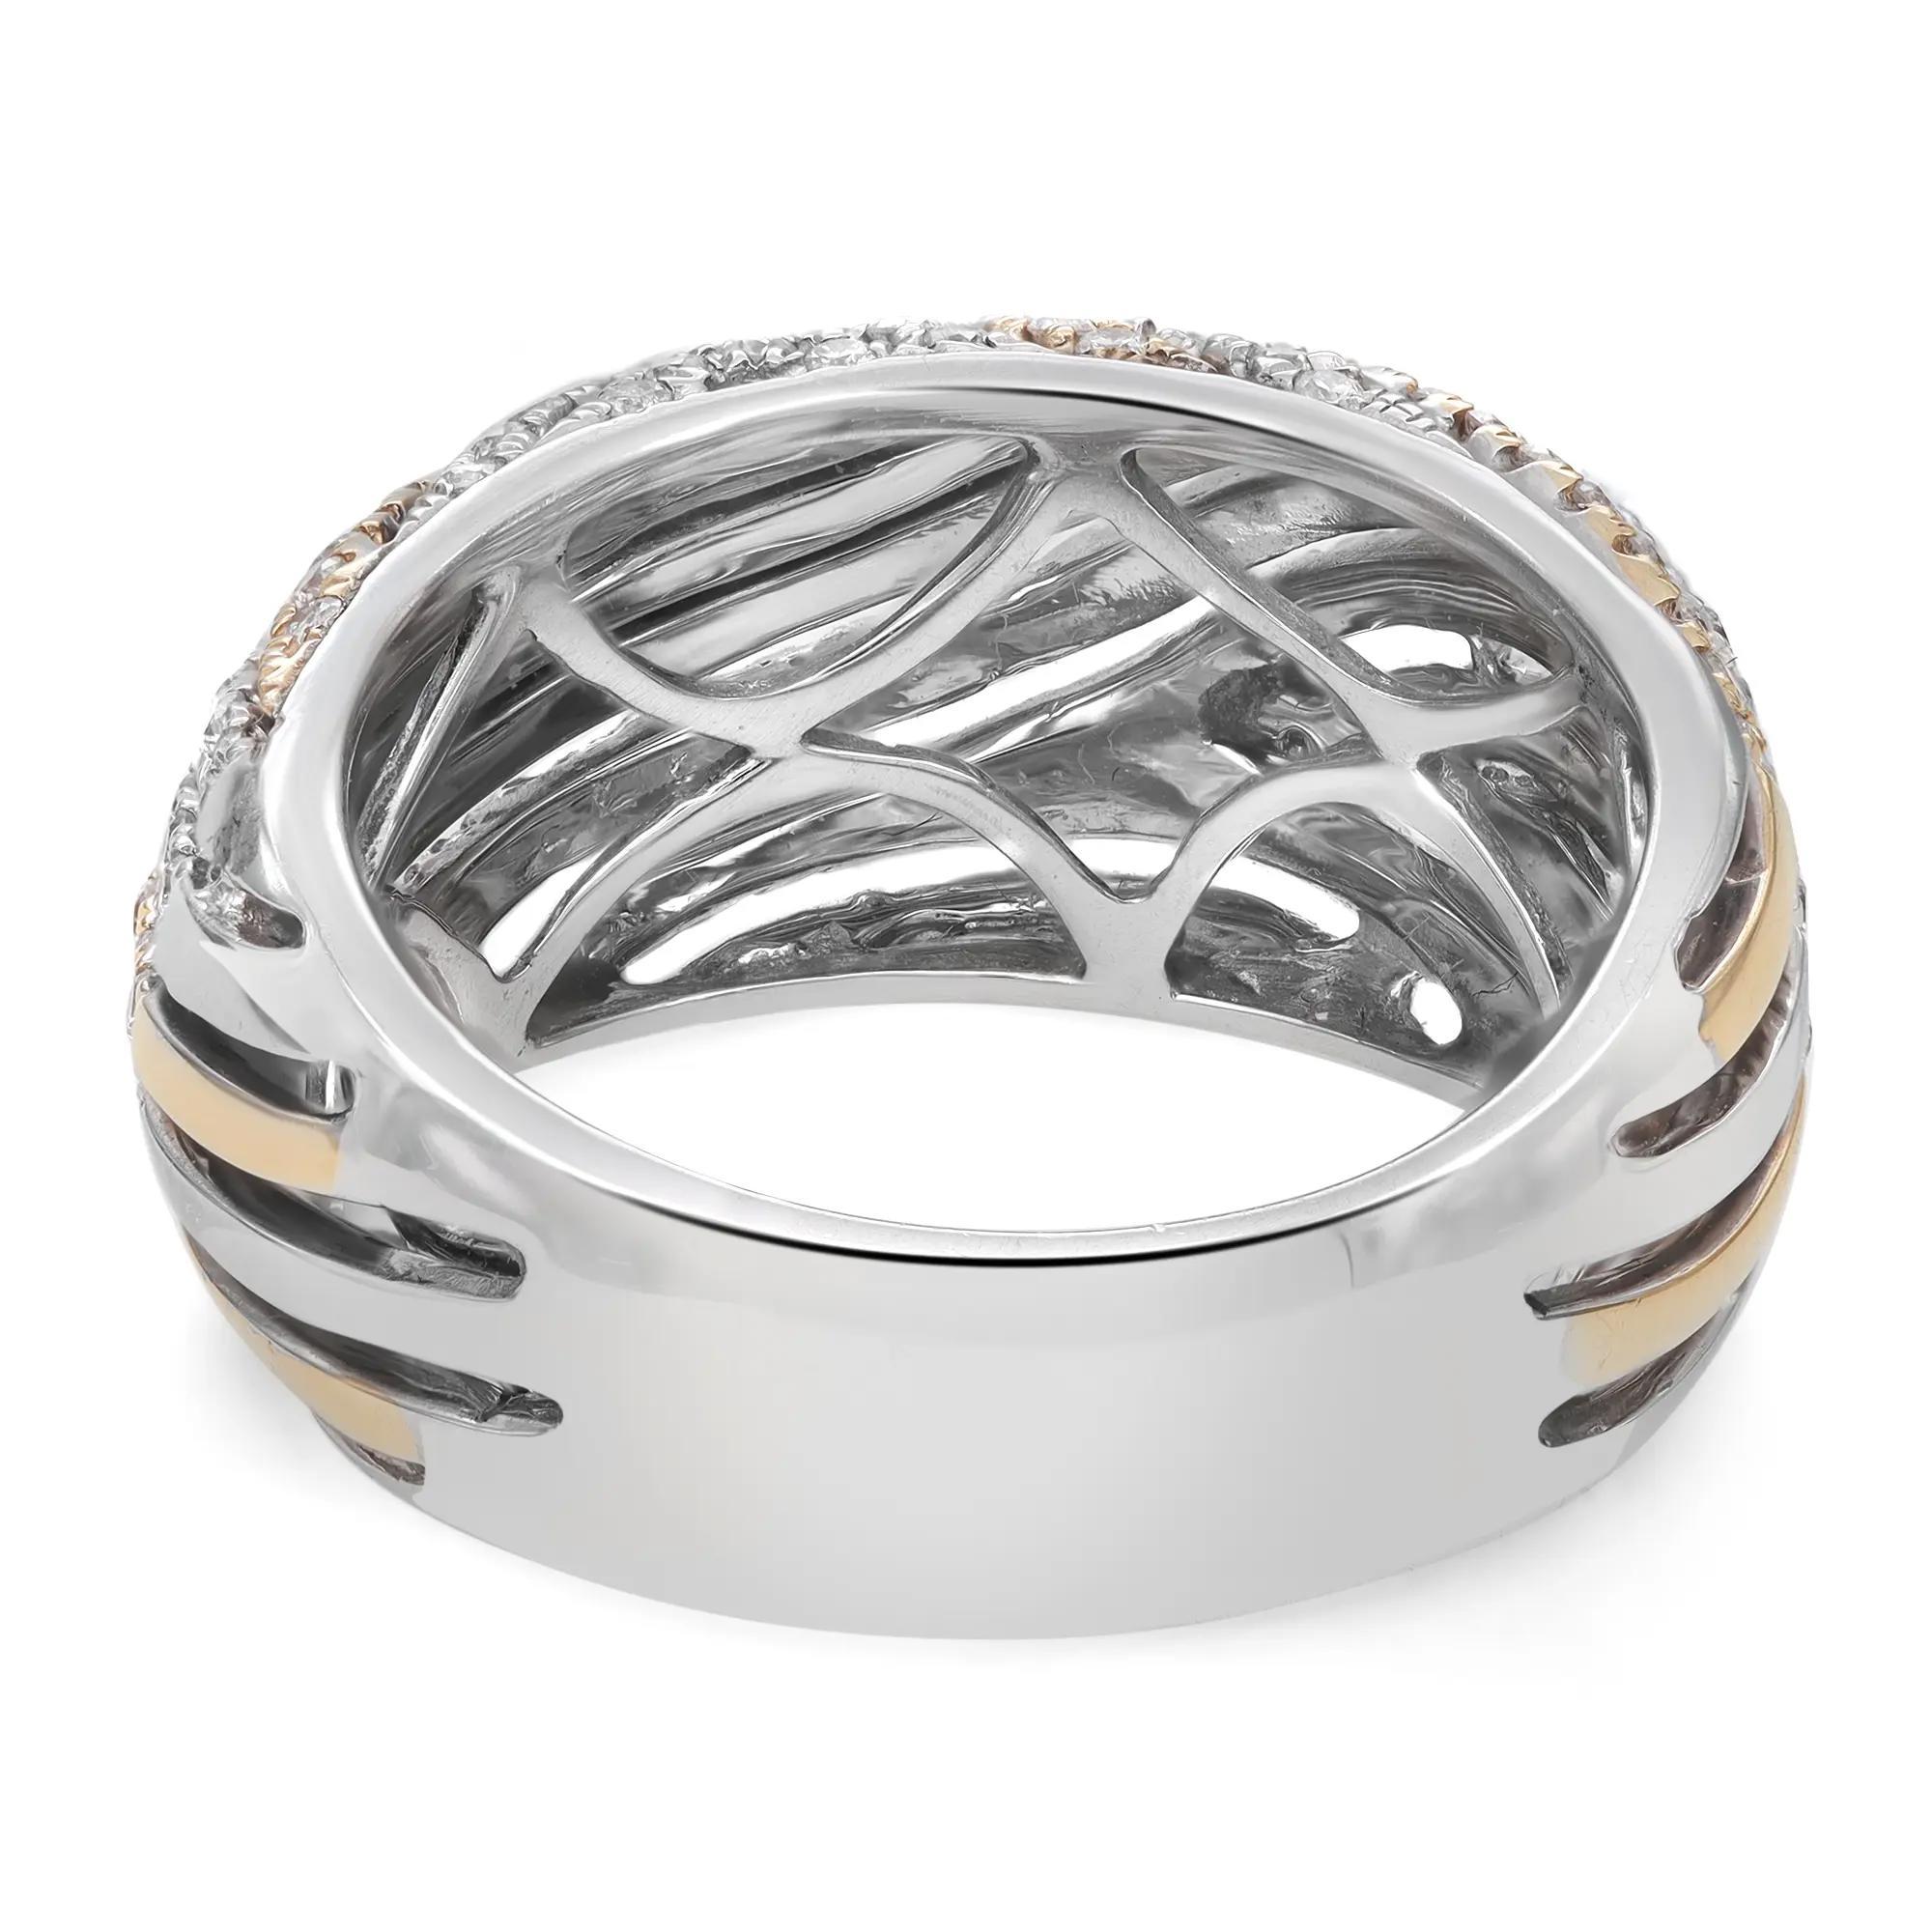 This two-tone elegant and classic diamond band ring is crafted in 14k yellow and white gold. Features multiple rows of prong set round brilliant cut diamonds set in a dome shaped shank weighing 1.08 carats. Diamond color I and SI clarity. Ring